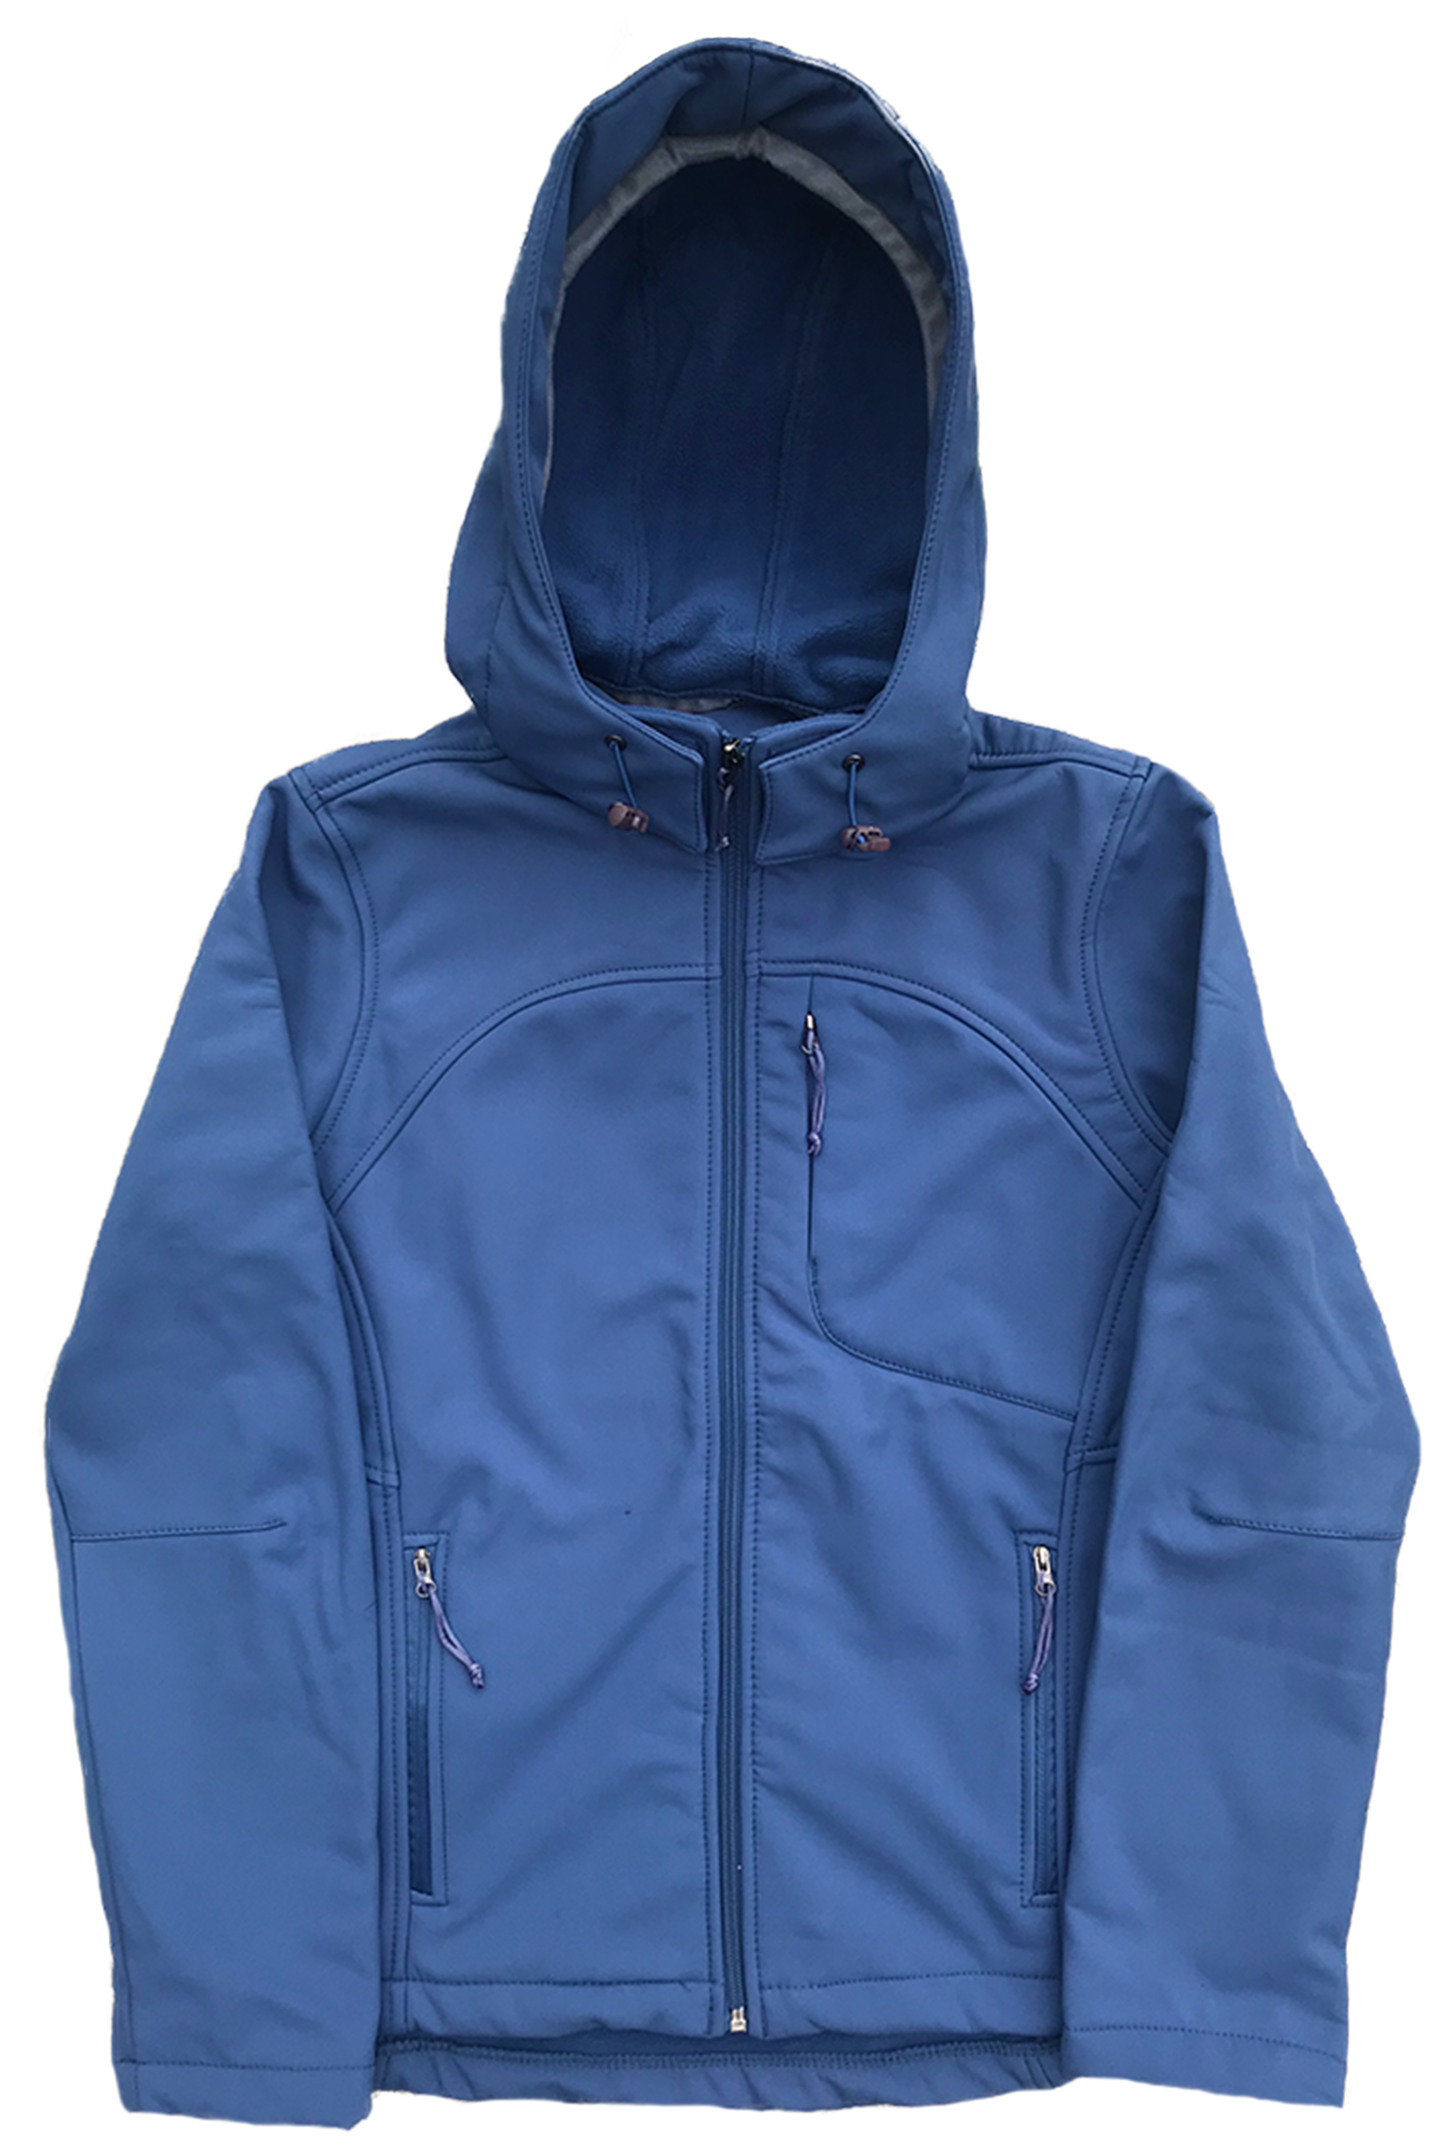 Women’s Softshell Water resistant Jacket with internal fleece lining and removable hood